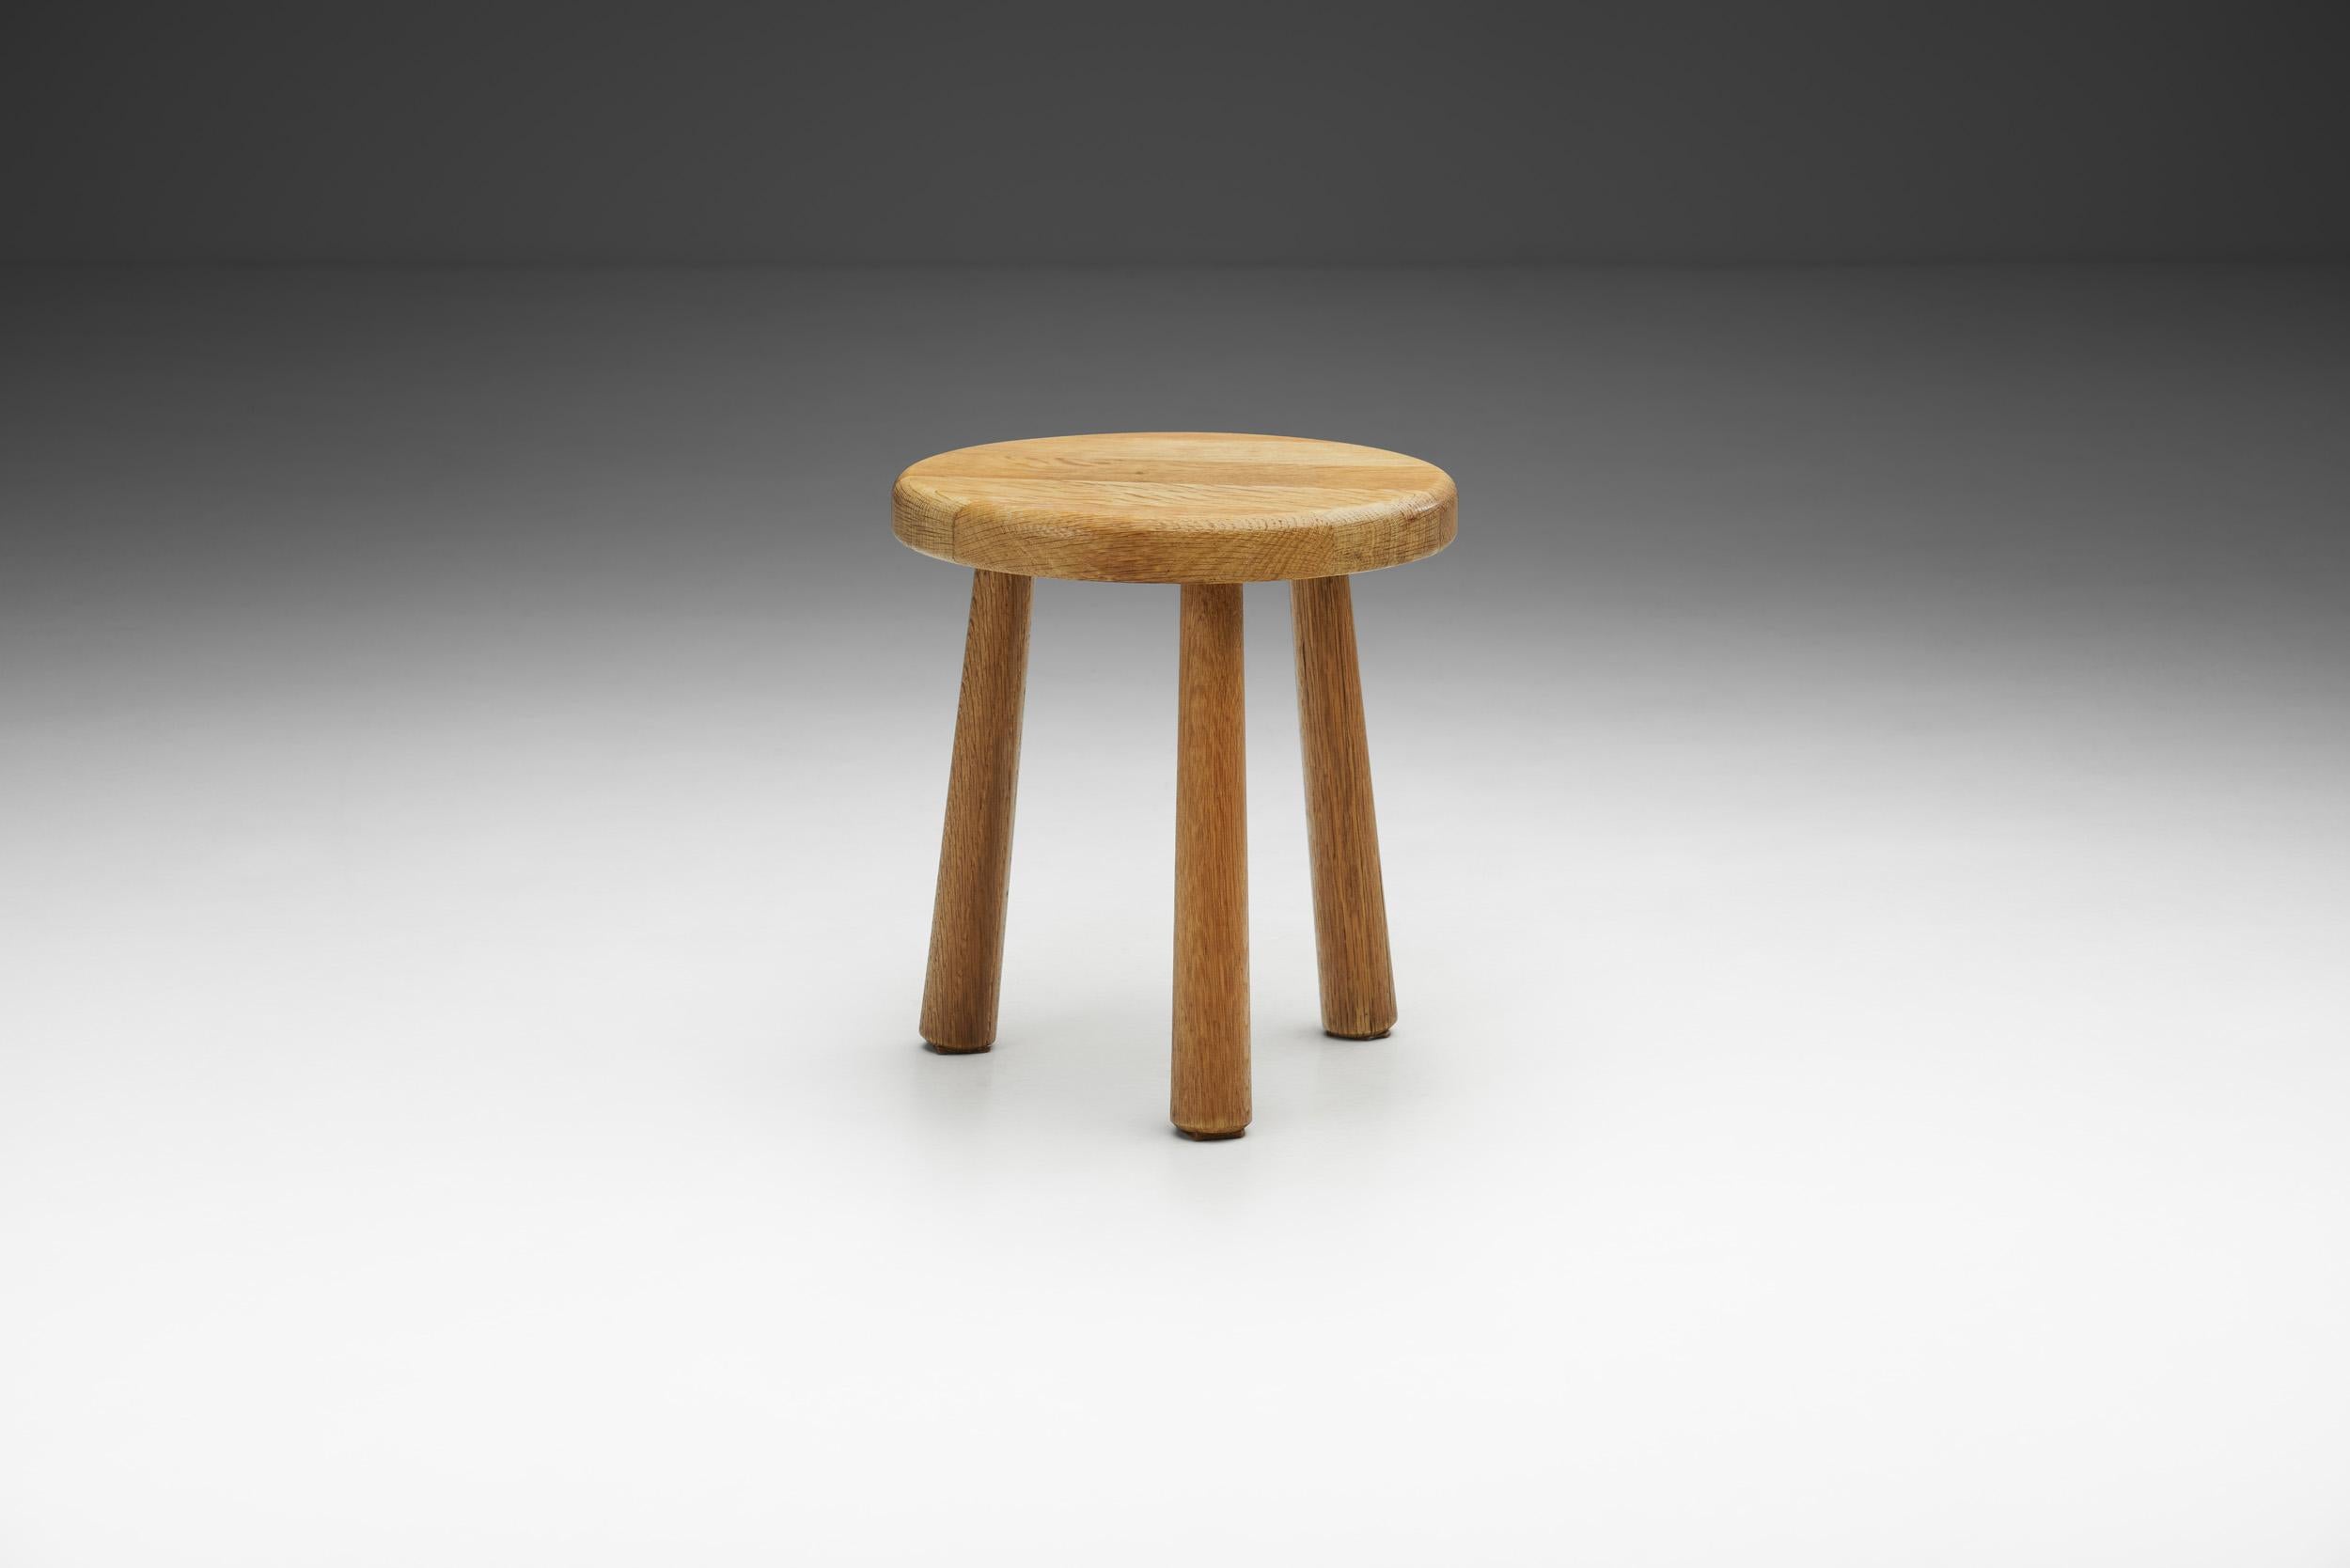 The design of this Dutch-made stool is characterized by a minimal, clean approach that seeks to combine functionality with beauty. Its focus is on simple lines and light spaces, devoid of clutter. Accordingly, form and function collide in this